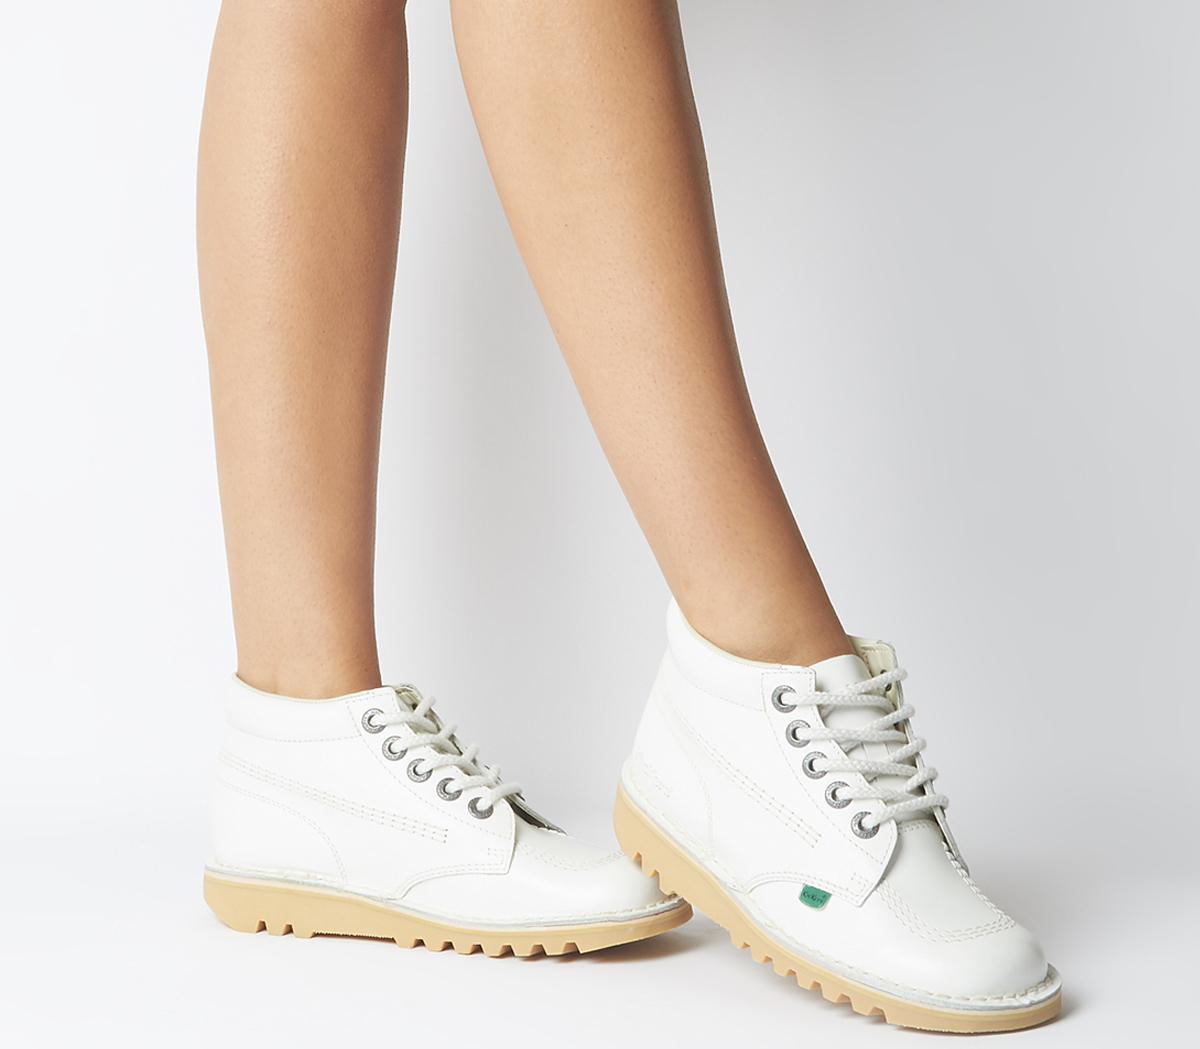 white kickers boots